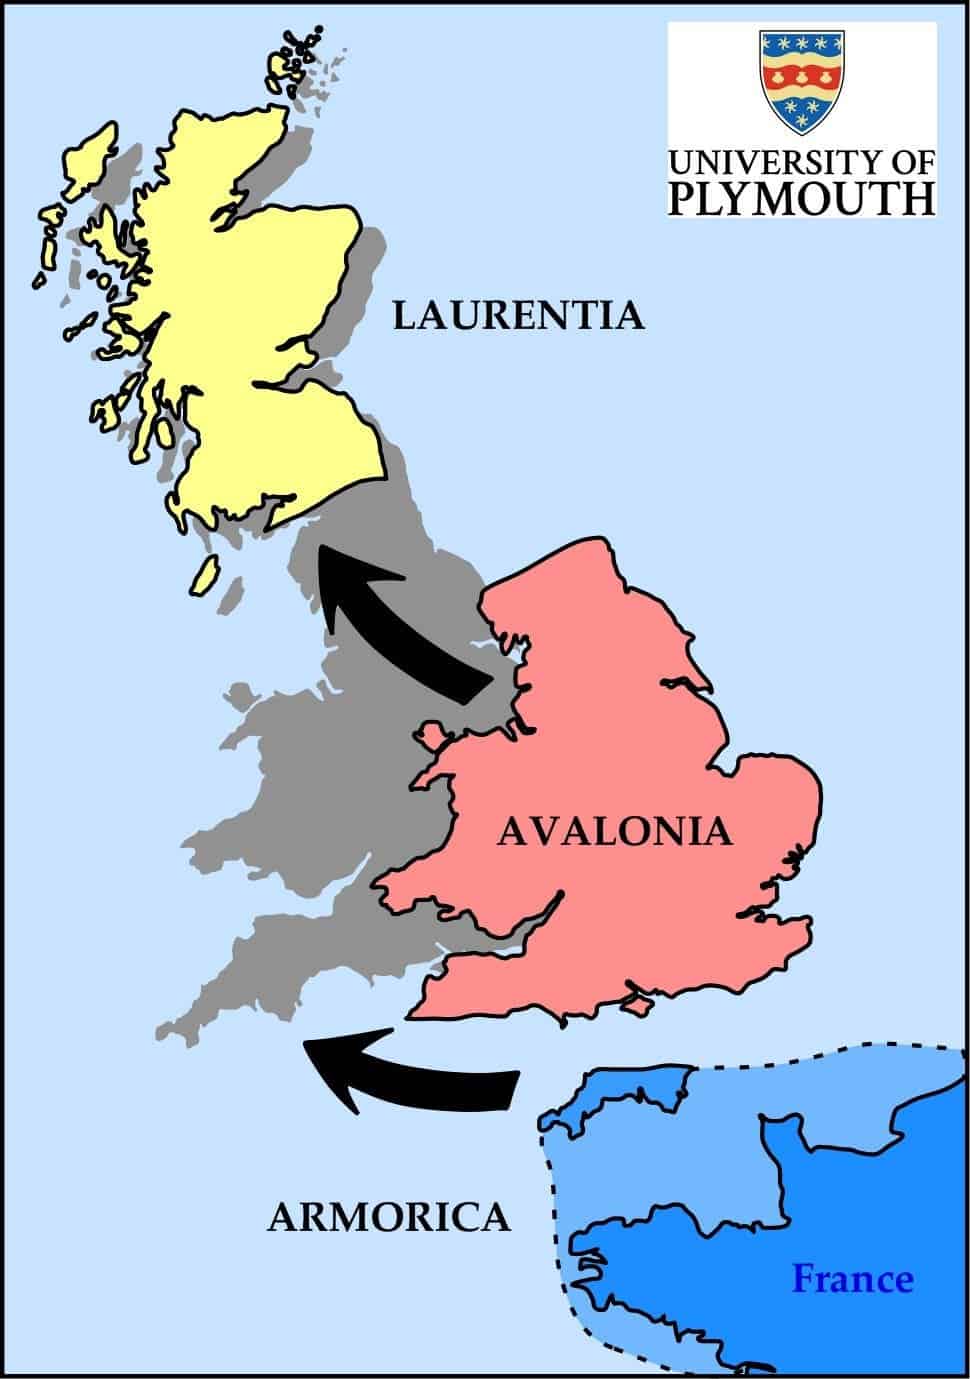 This graphic shows how the ancient land masses of Laurentia, Avalonia and Armorica would have collided to create the countries of England, Scotland and Wales. Credit: University of Plymouth